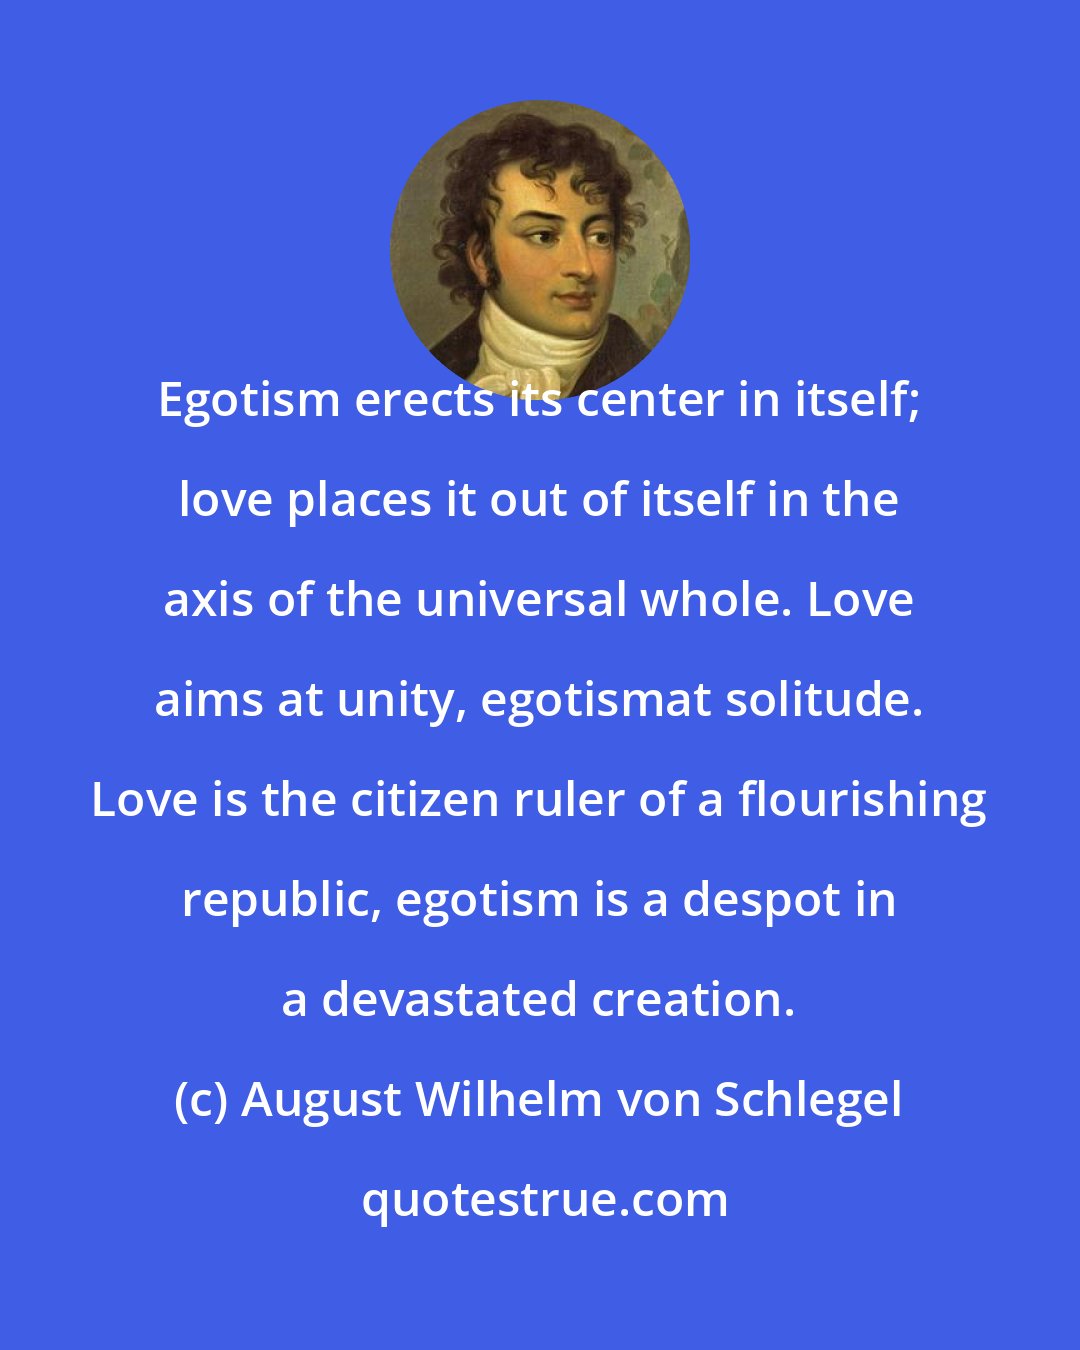 August Wilhelm von Schlegel: Egotism erects its center in itself; love places it out of itself in the axis of the universal whole. Love aims at unity, egotismat solitude. Love is the citizen ruler of a flourishing republic, egotism is a despot in a devastated creation.